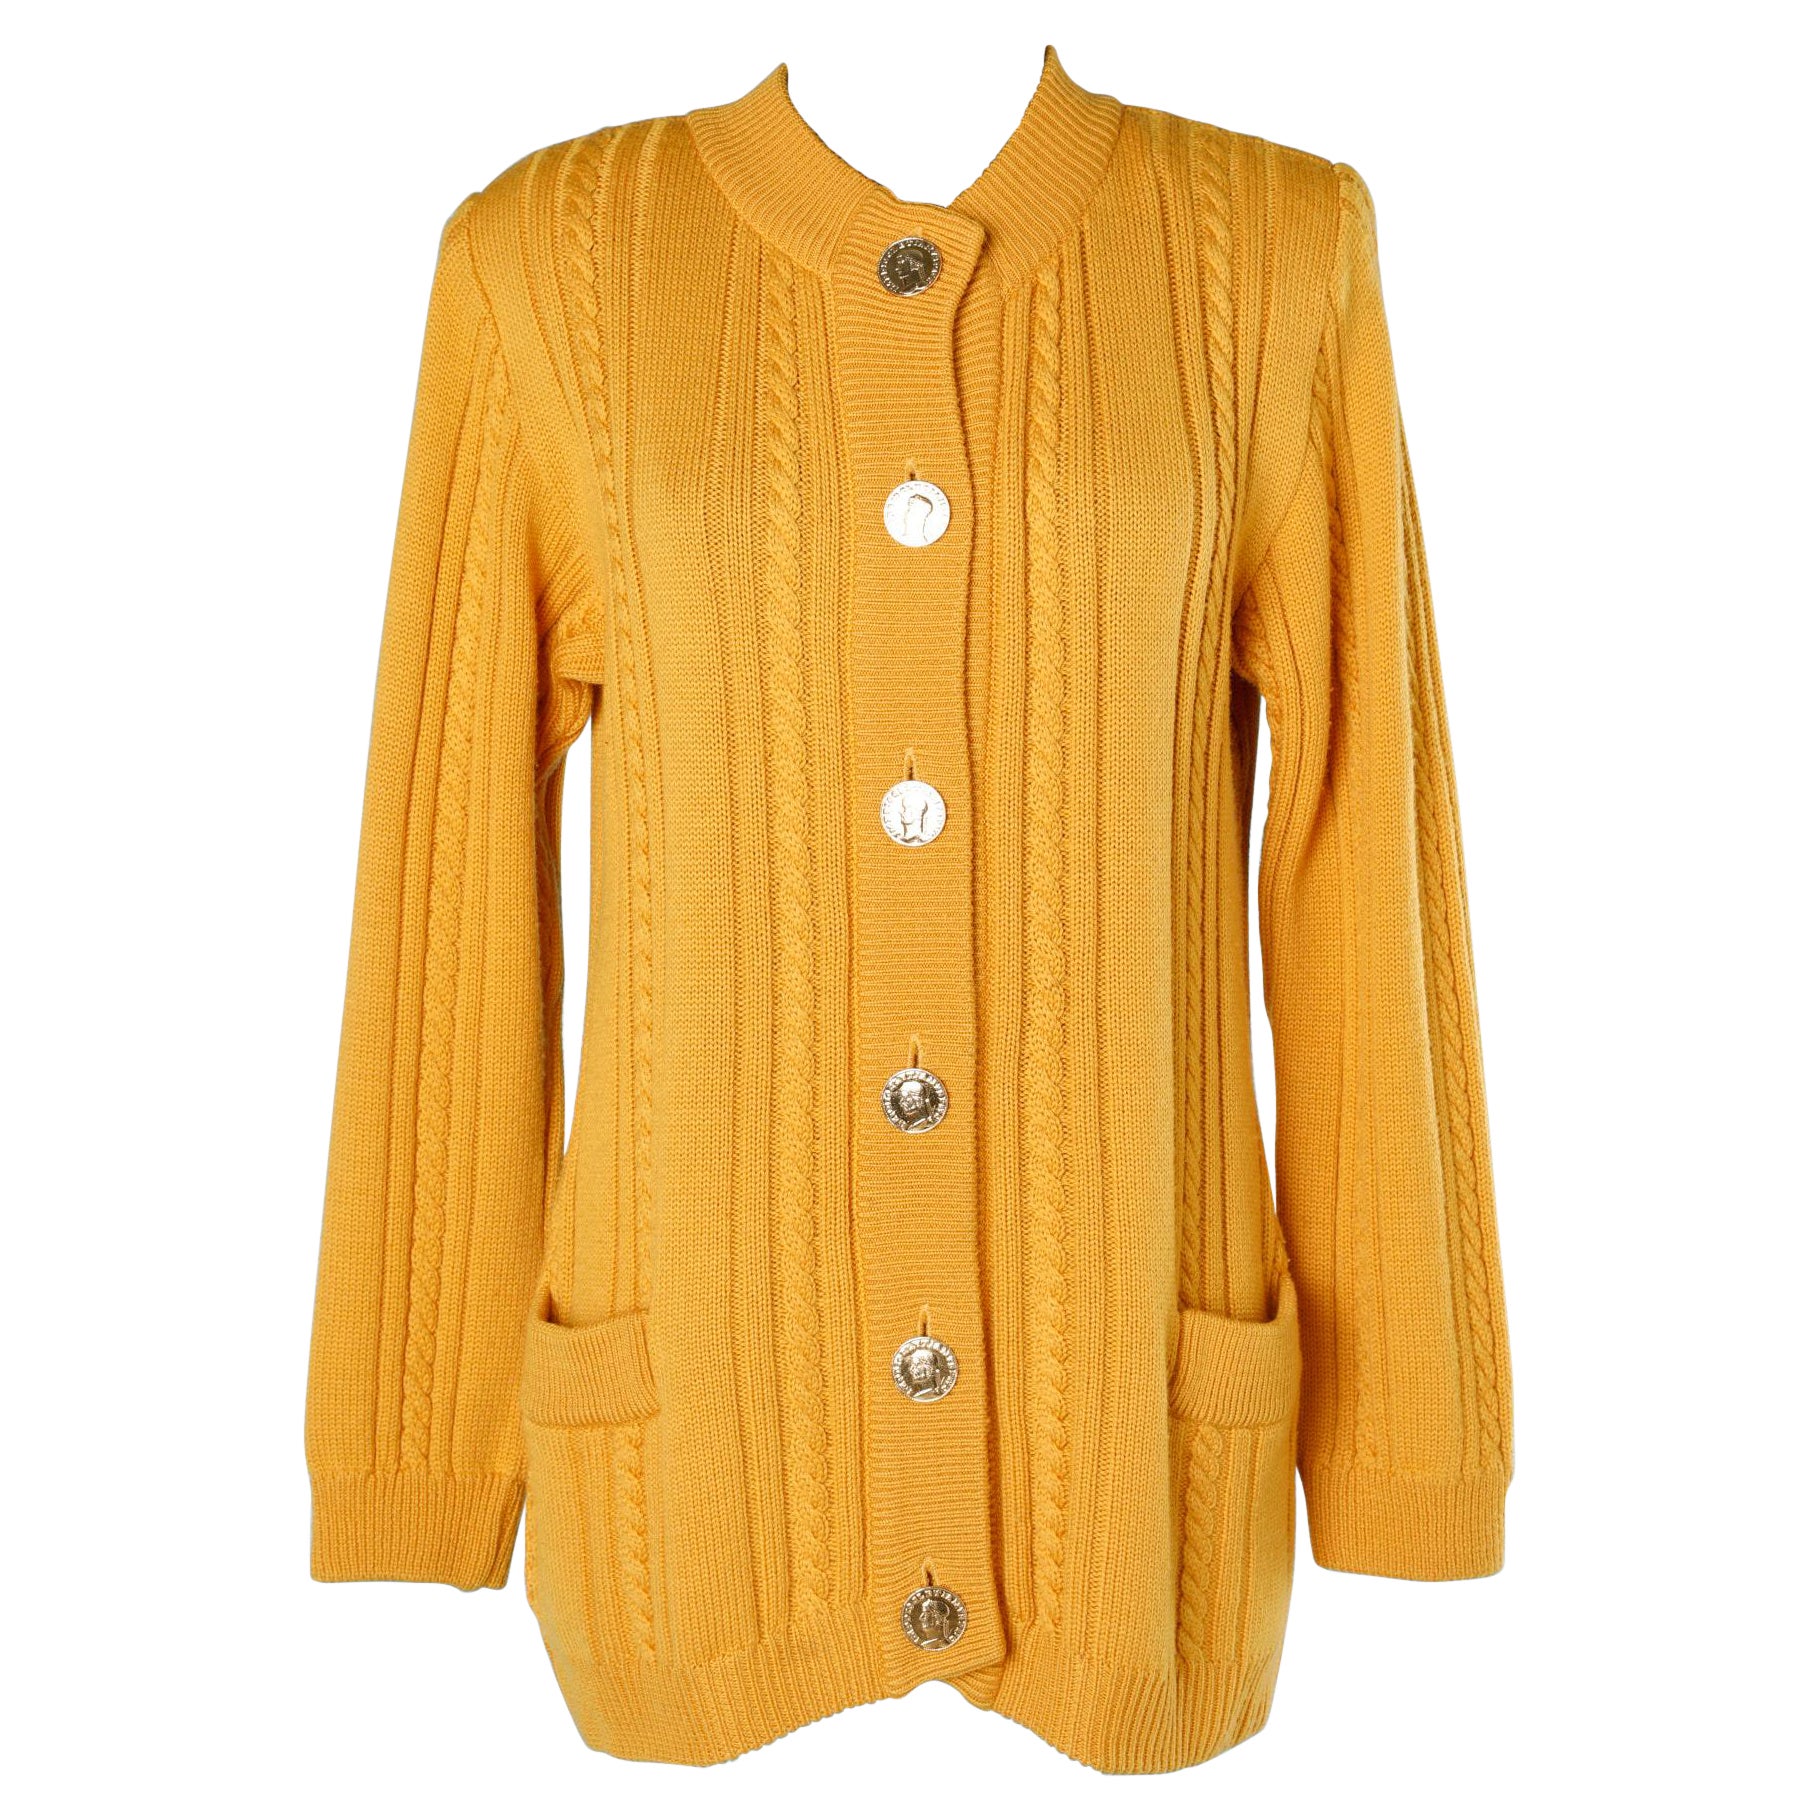 Mustard knit cardigan with gold metal buttons Yves Saint Laurent Rive Gauche  For Sale